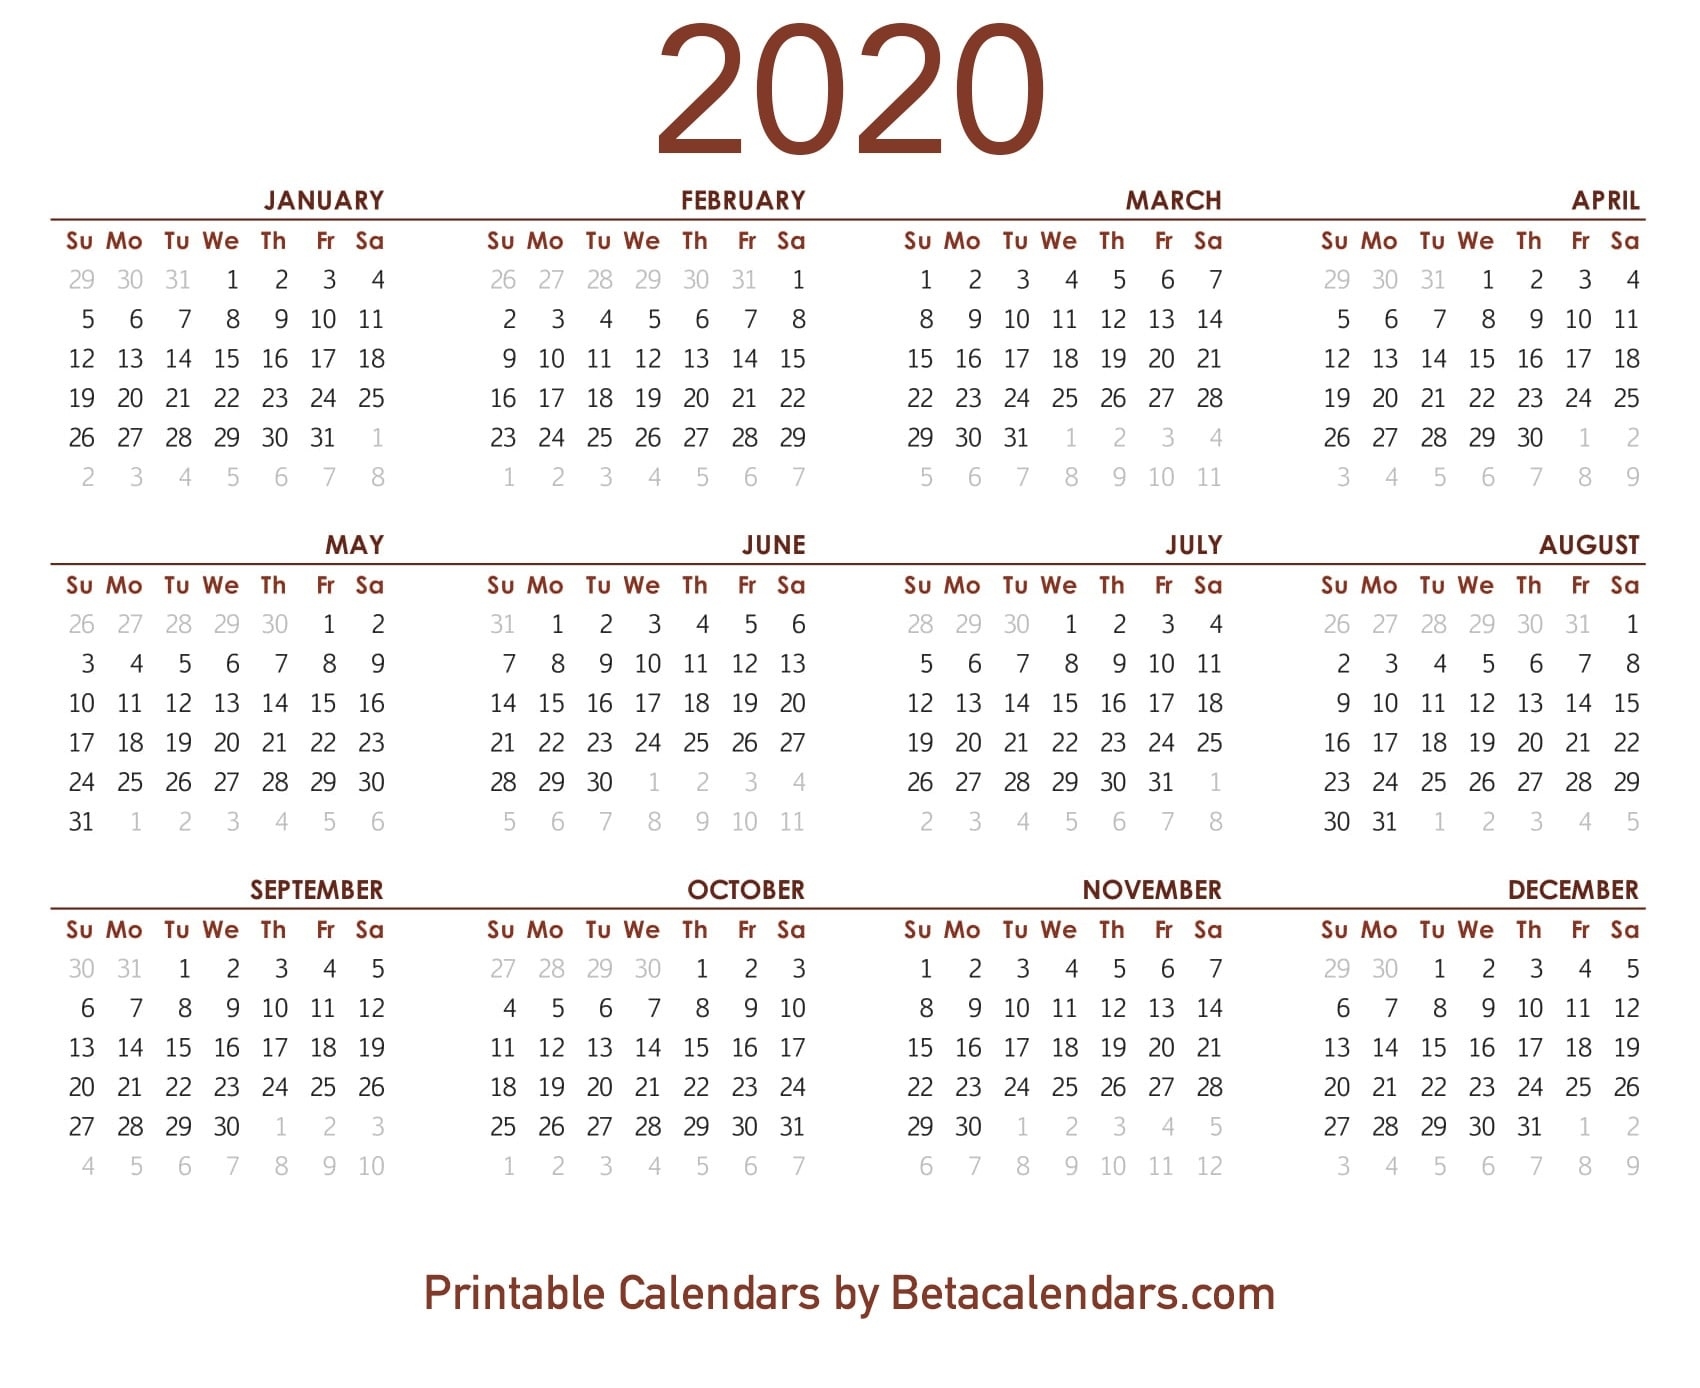 2020 Calendar - Free Printable Yearly Calendar 2020 Incredible Printable 2020Calender For The Whole Year